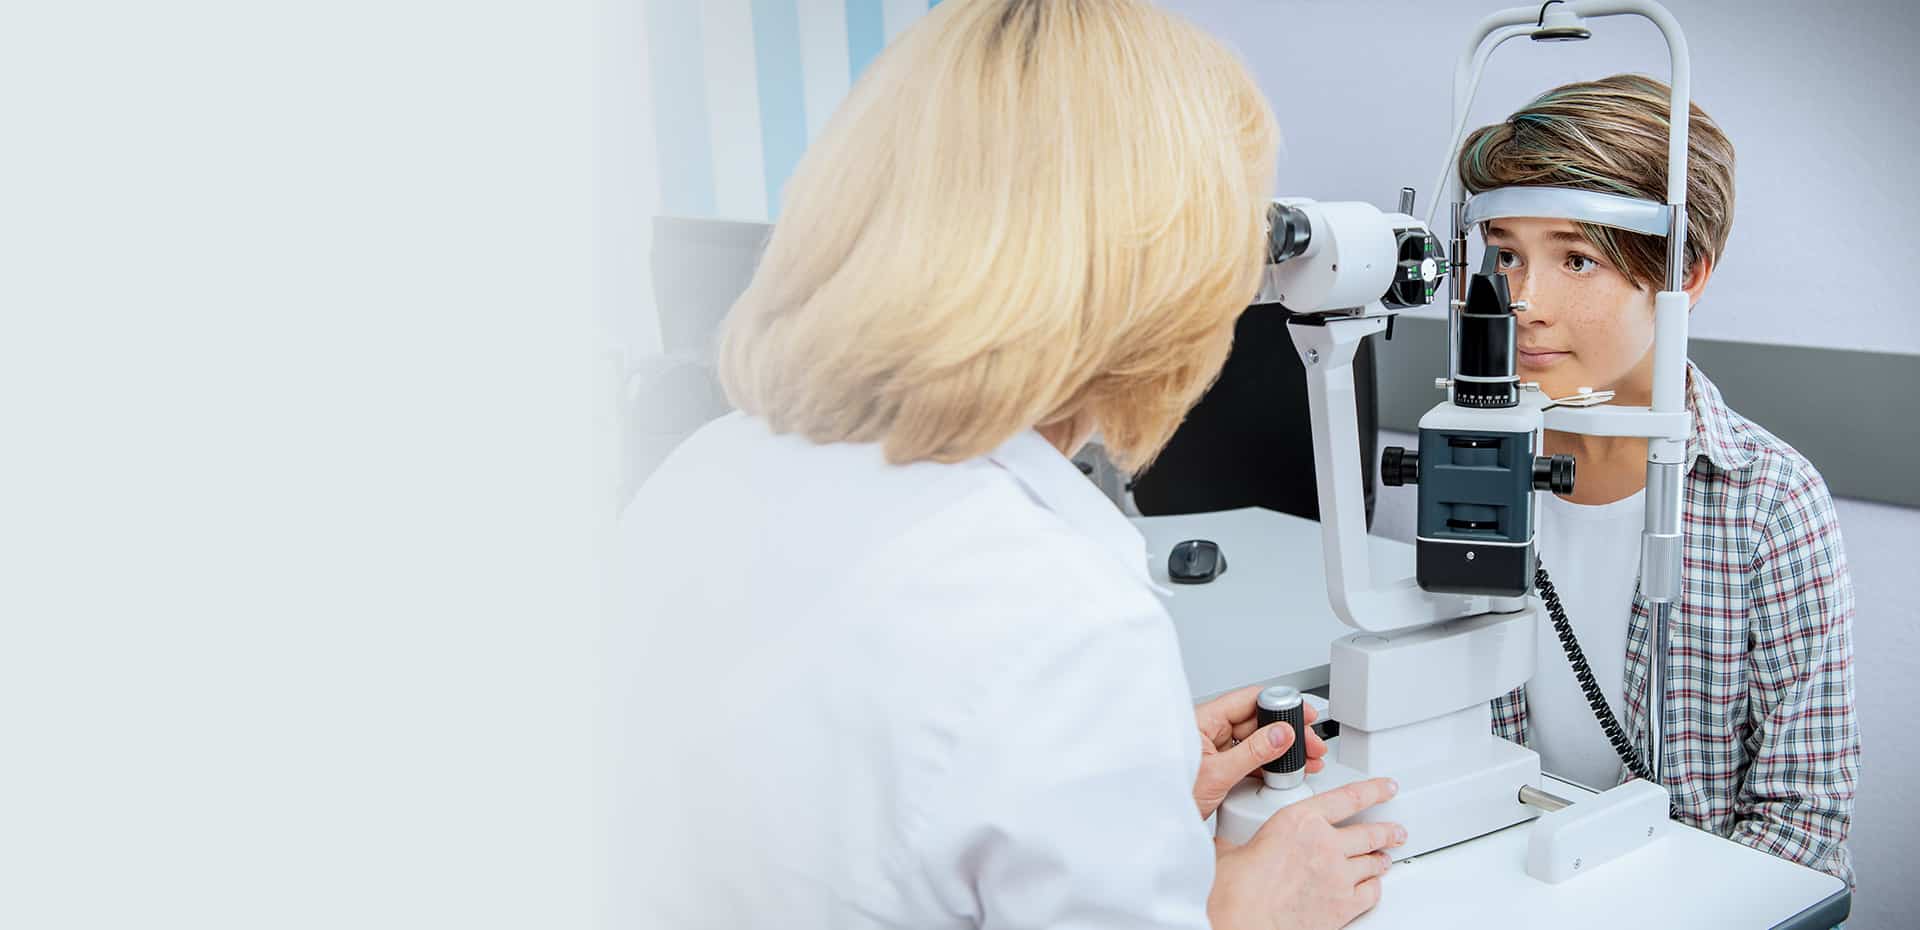 How much does LASIK surgery cost?